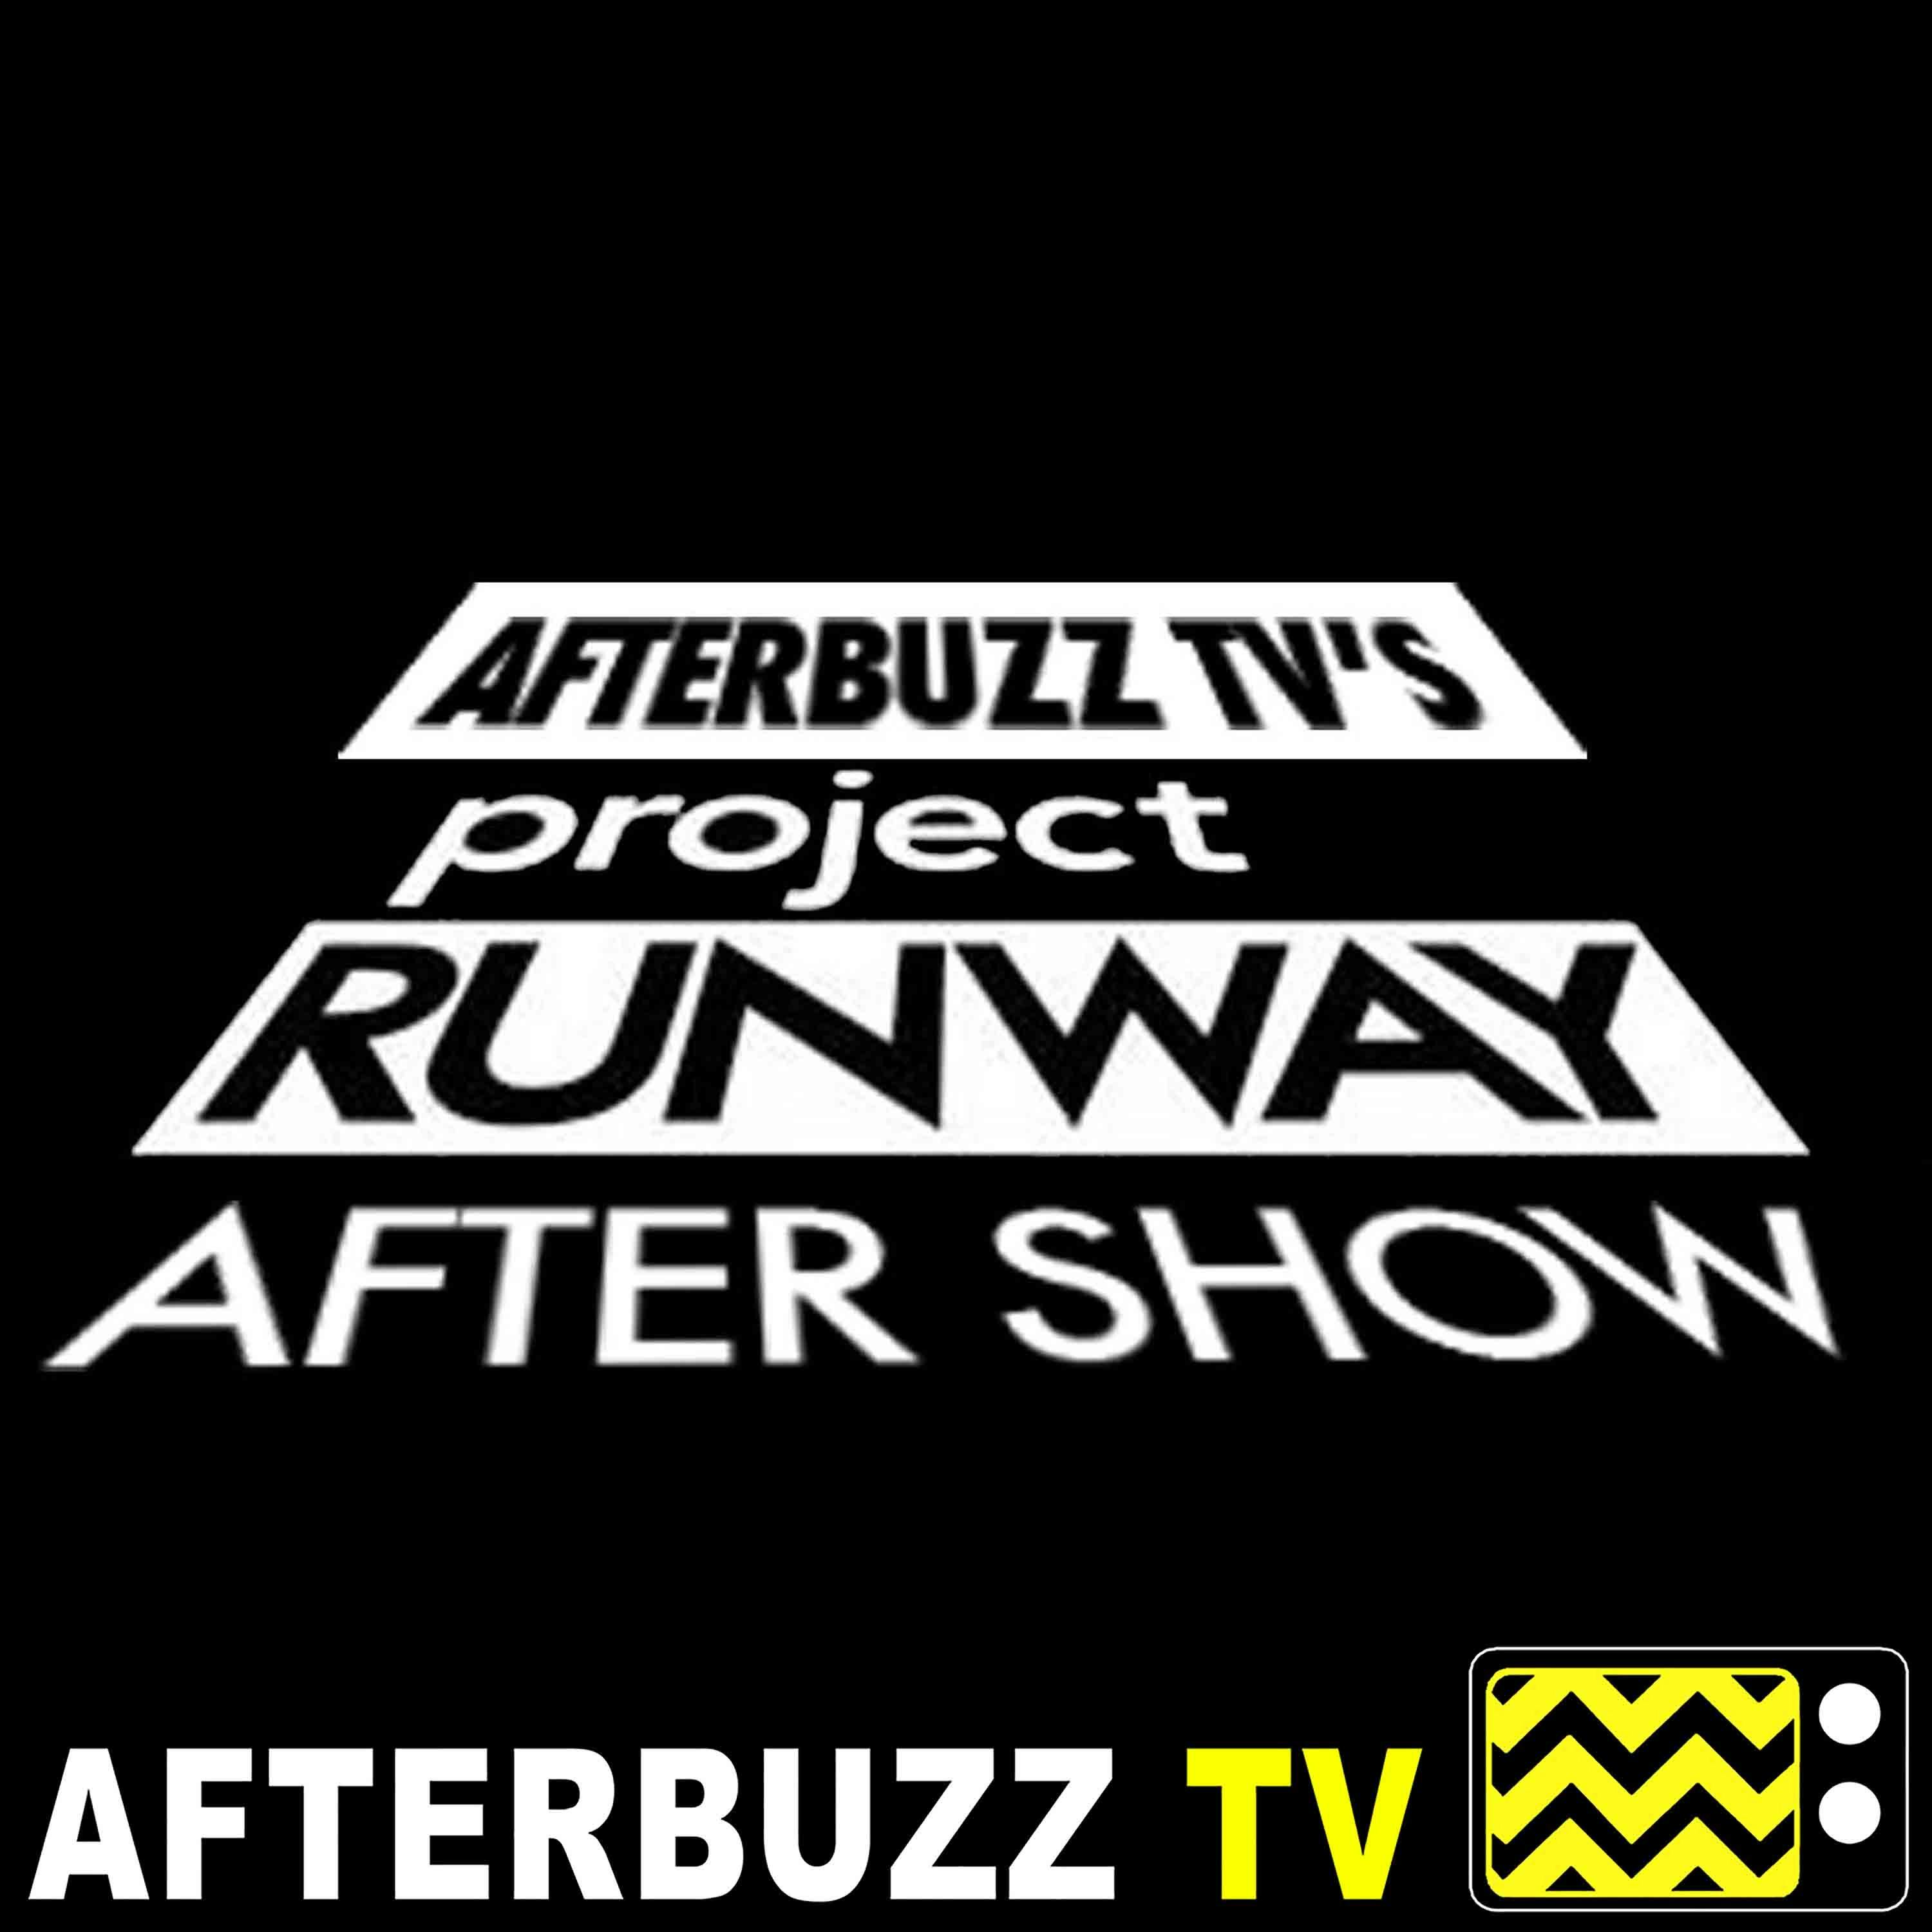 Project Runway All Stars S:6 | Posen on the Red Carpet E:9 | AfterBuzz TV AfterShow